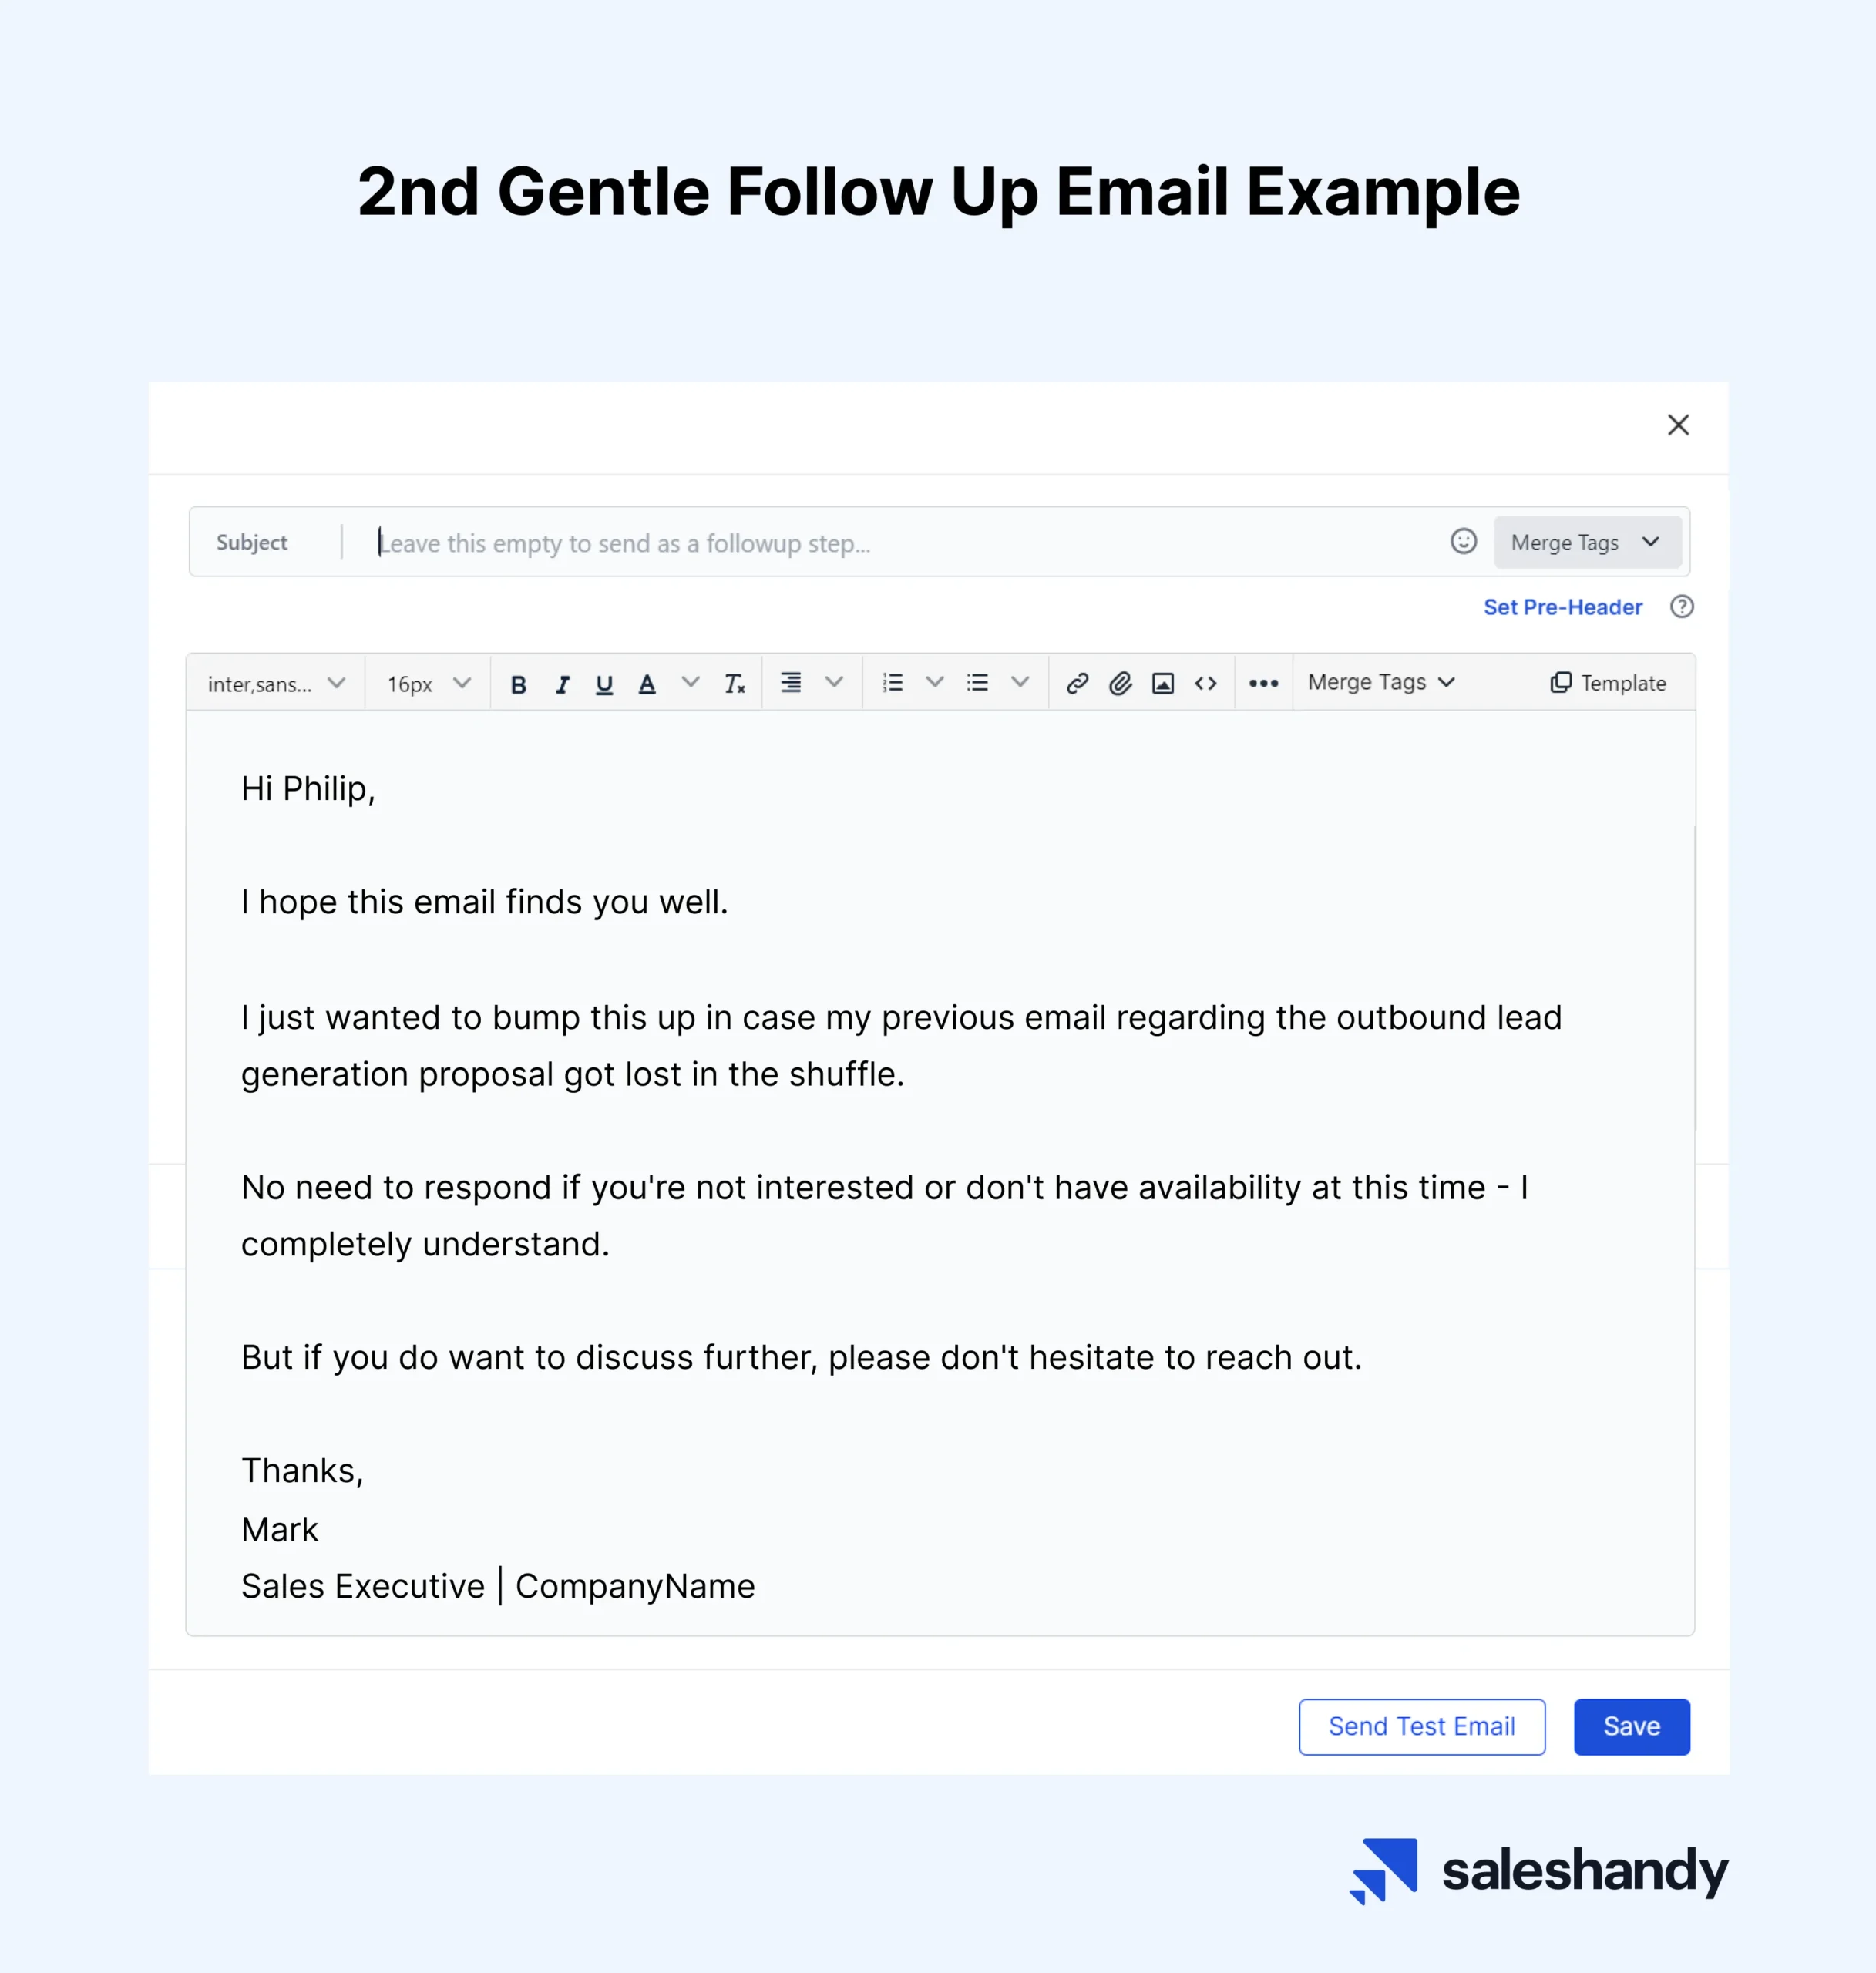 2nd Gentle Follow Up Email Example